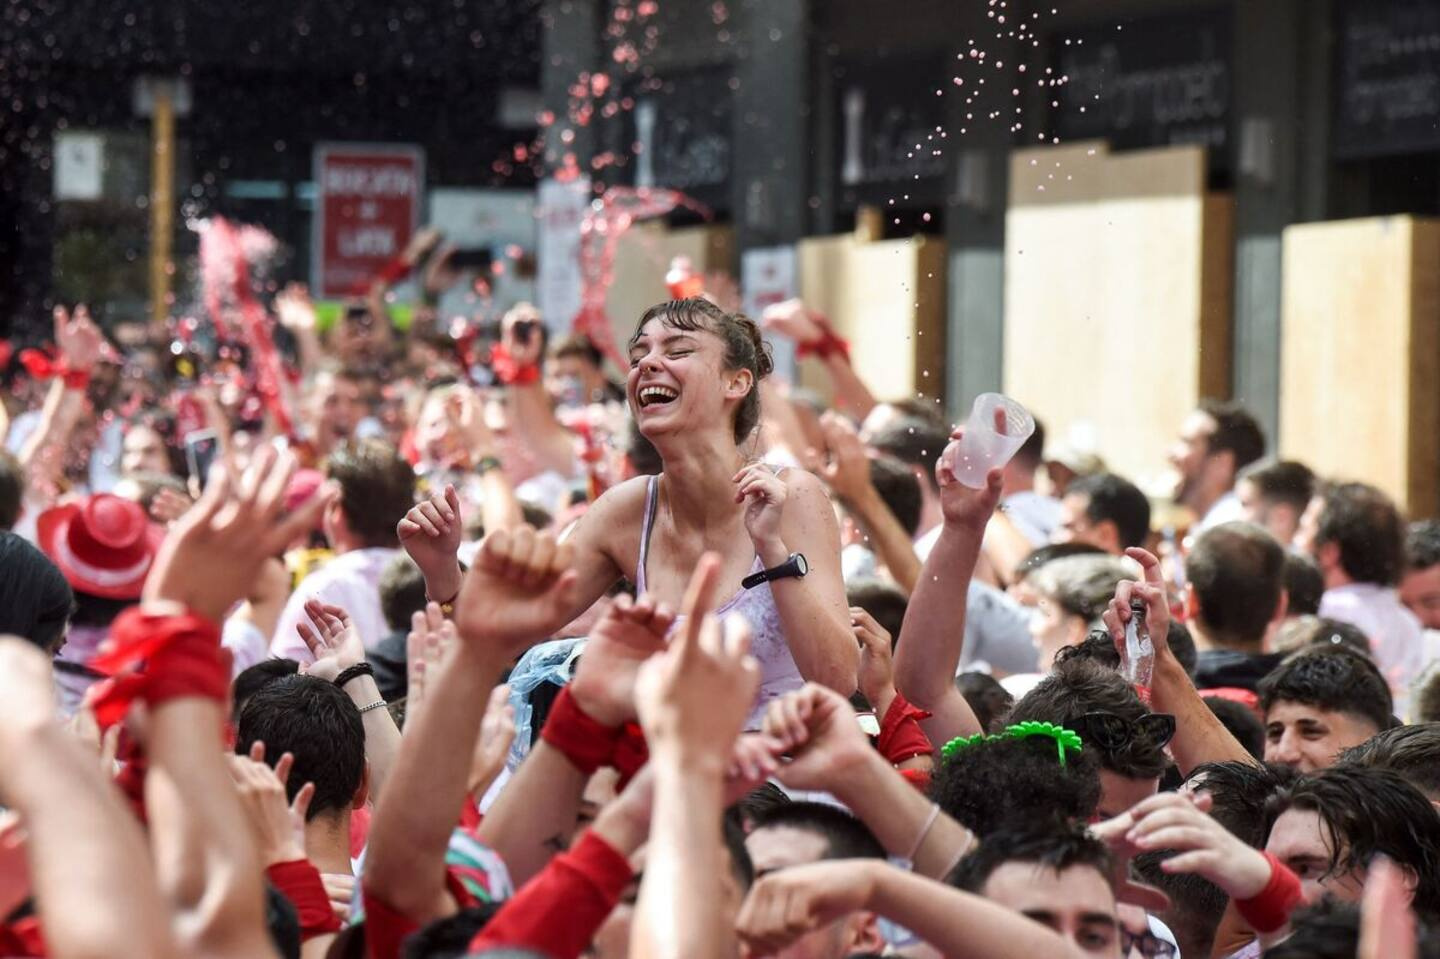 [IN PHOTOS] Viva San Fermin! Return of the party to Pamplona after a two-year break